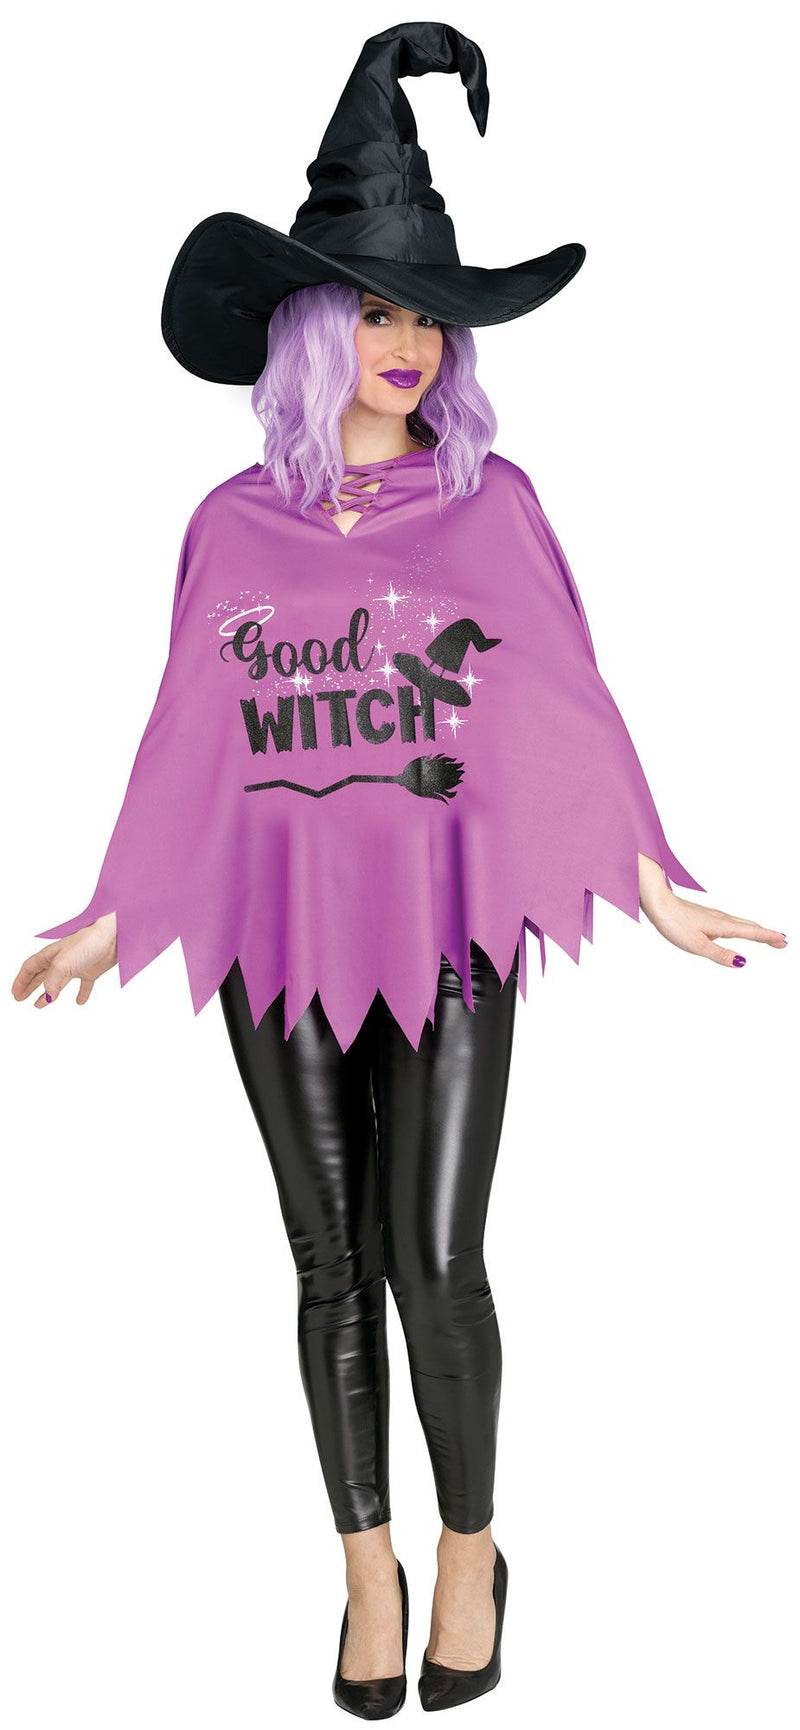 The Good Witch Poncho